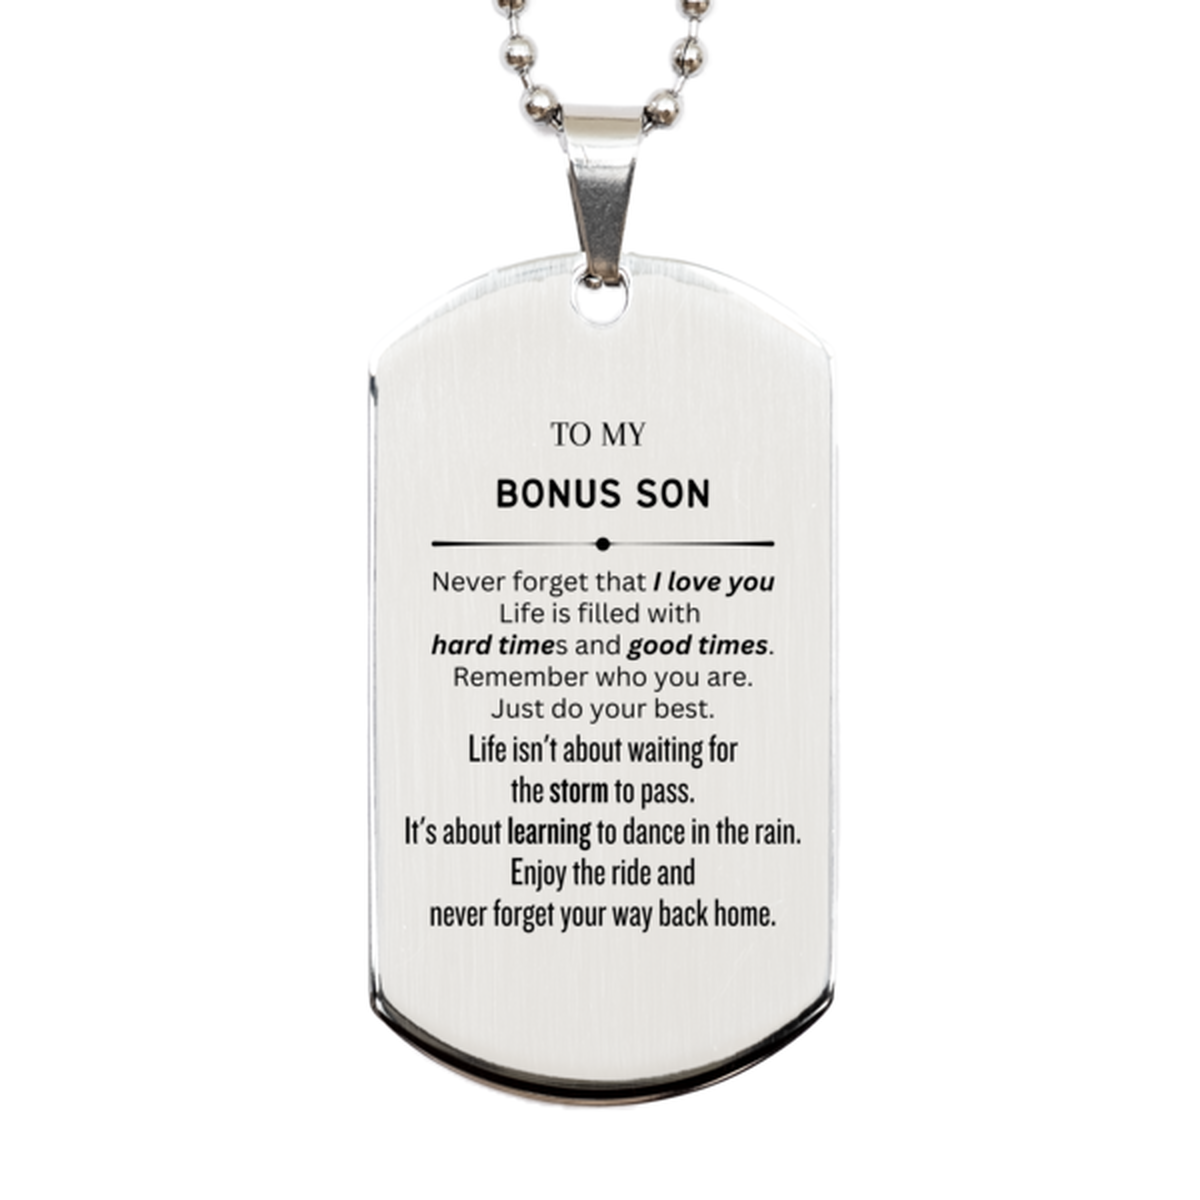 Christmas Bonus Son Silver Dog Tag Gifts, To My Bonus Son Birthday Thank You Gifts For Bonus Son, Graduation Unique Gifts For Bonus Son To My Bonus Son Never forget that I love you life is filled with hard times and good times. Remember who you are. Just